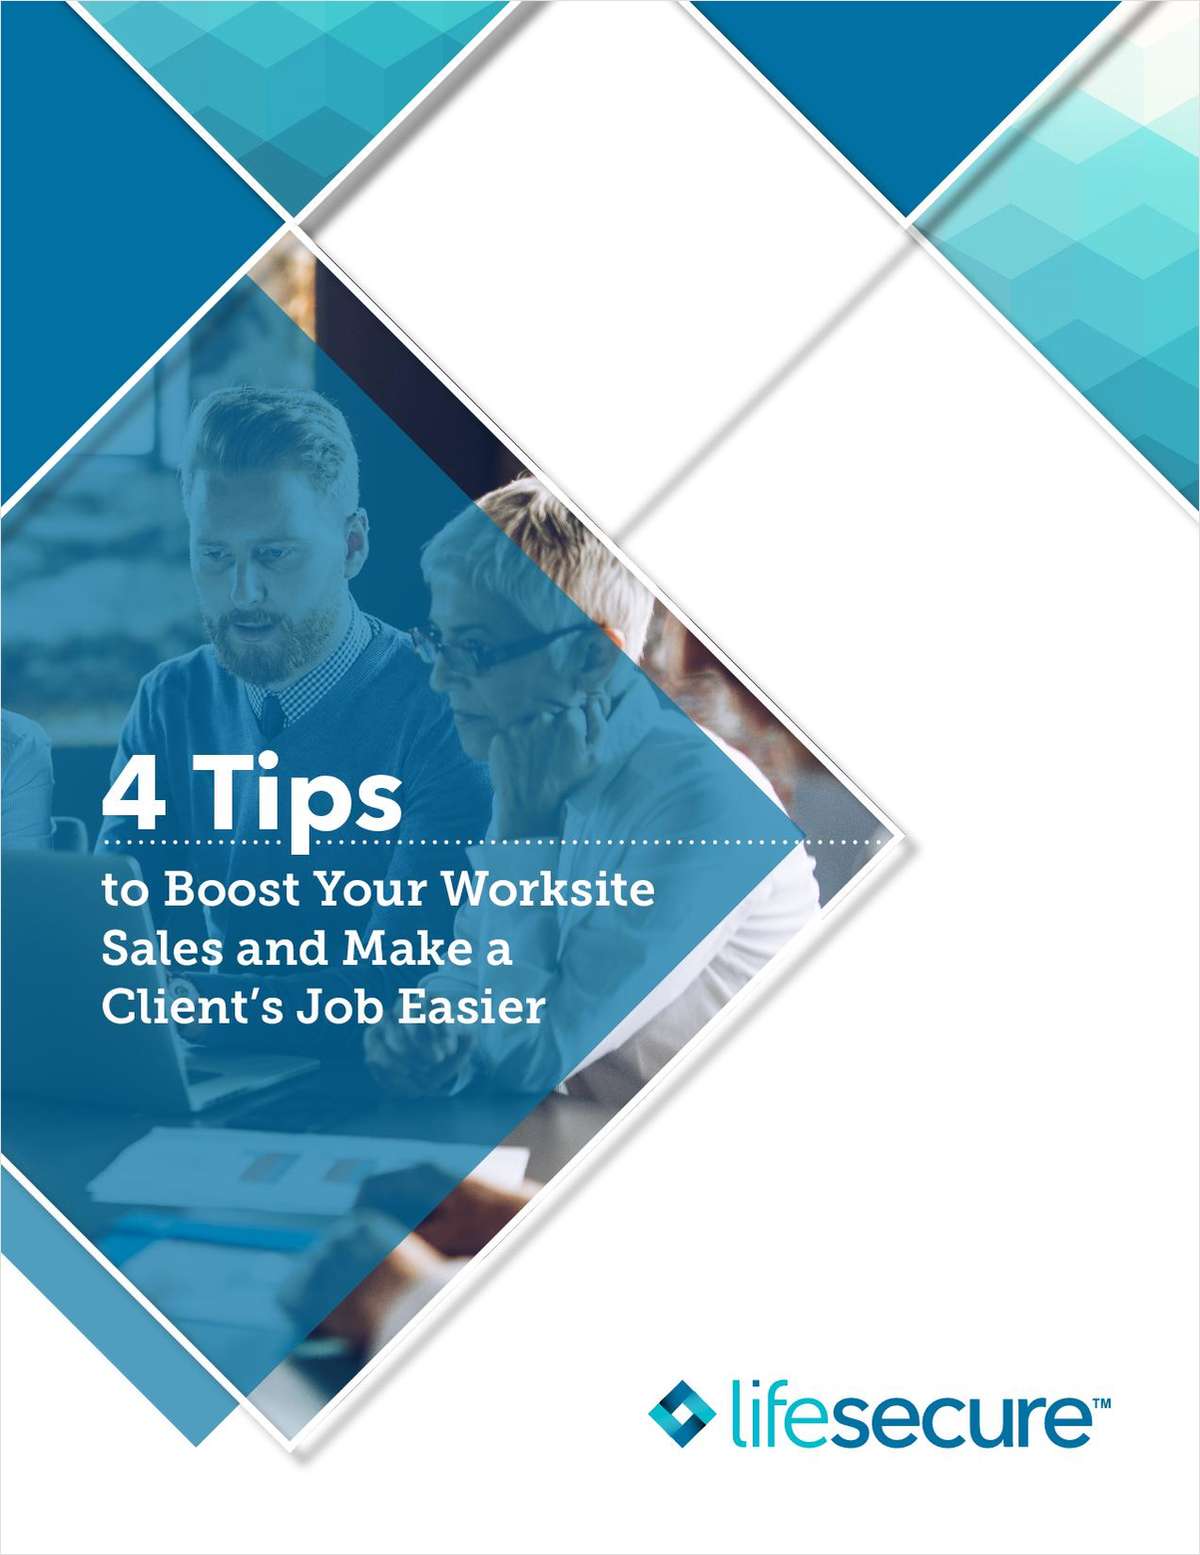 4 Tips to Boost Your Worksite Sales and Make a Client's Job Easier link